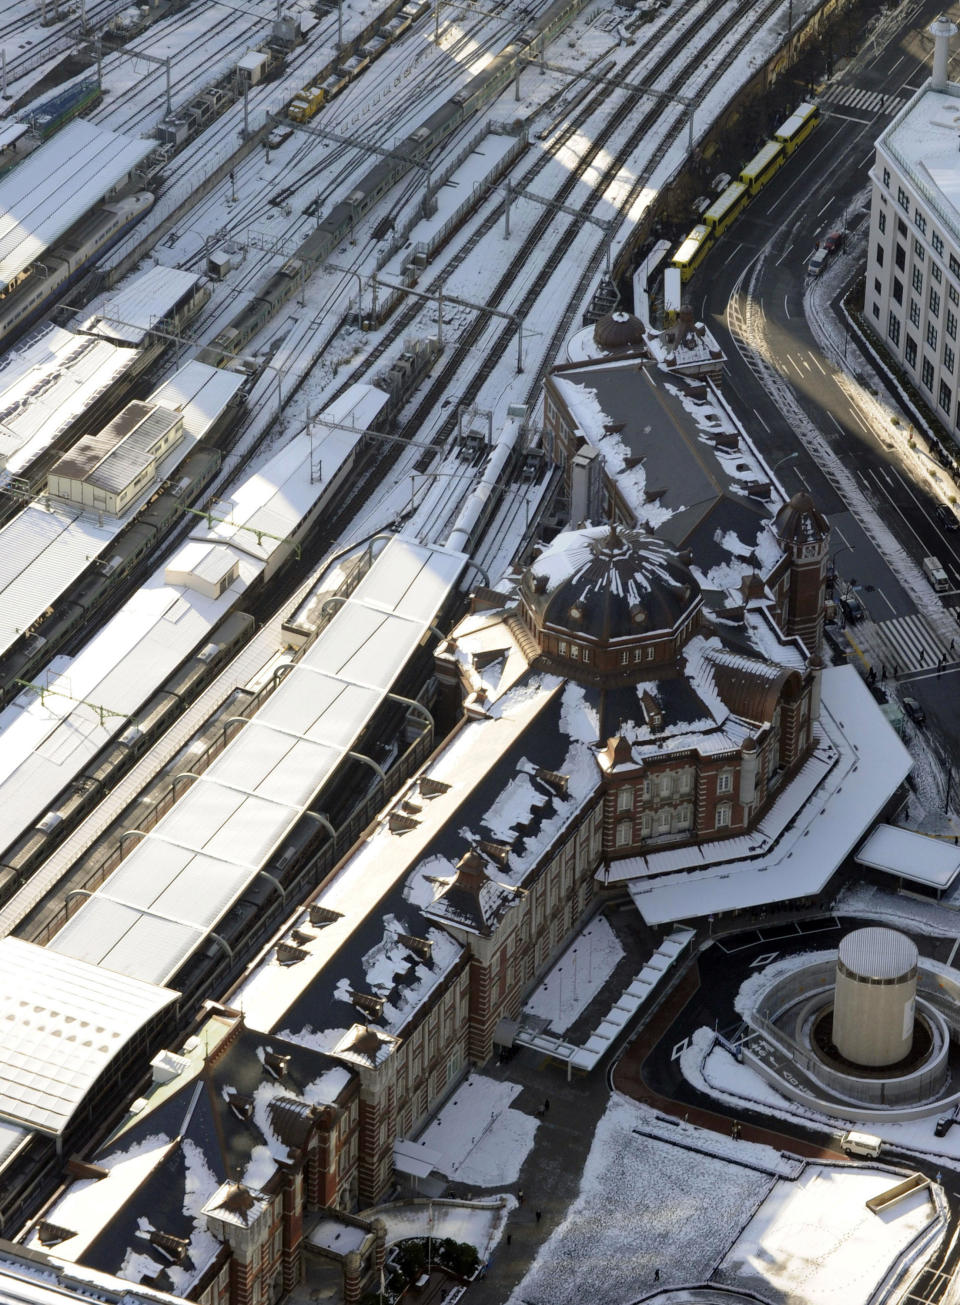 Tokyo Station is still covered with snow in Tokyo Tuesday, Jan. 15, 2013 following Monday's snowfall. In the season's first snowfall in the Japanese capital, about 8 centimeters (3 inches) of snow fell in central Tokyo and around Narita on Monday - a national holiday in Japan. The snow snarled traffic and caused train delays. (AP Photo/Kyodo News) JAPAN OUT, MANDATORY CREDIT, NO LICENSING IN CHINA, HONG KONG, JAPAN, SOUTH KOREA AND FRANCE